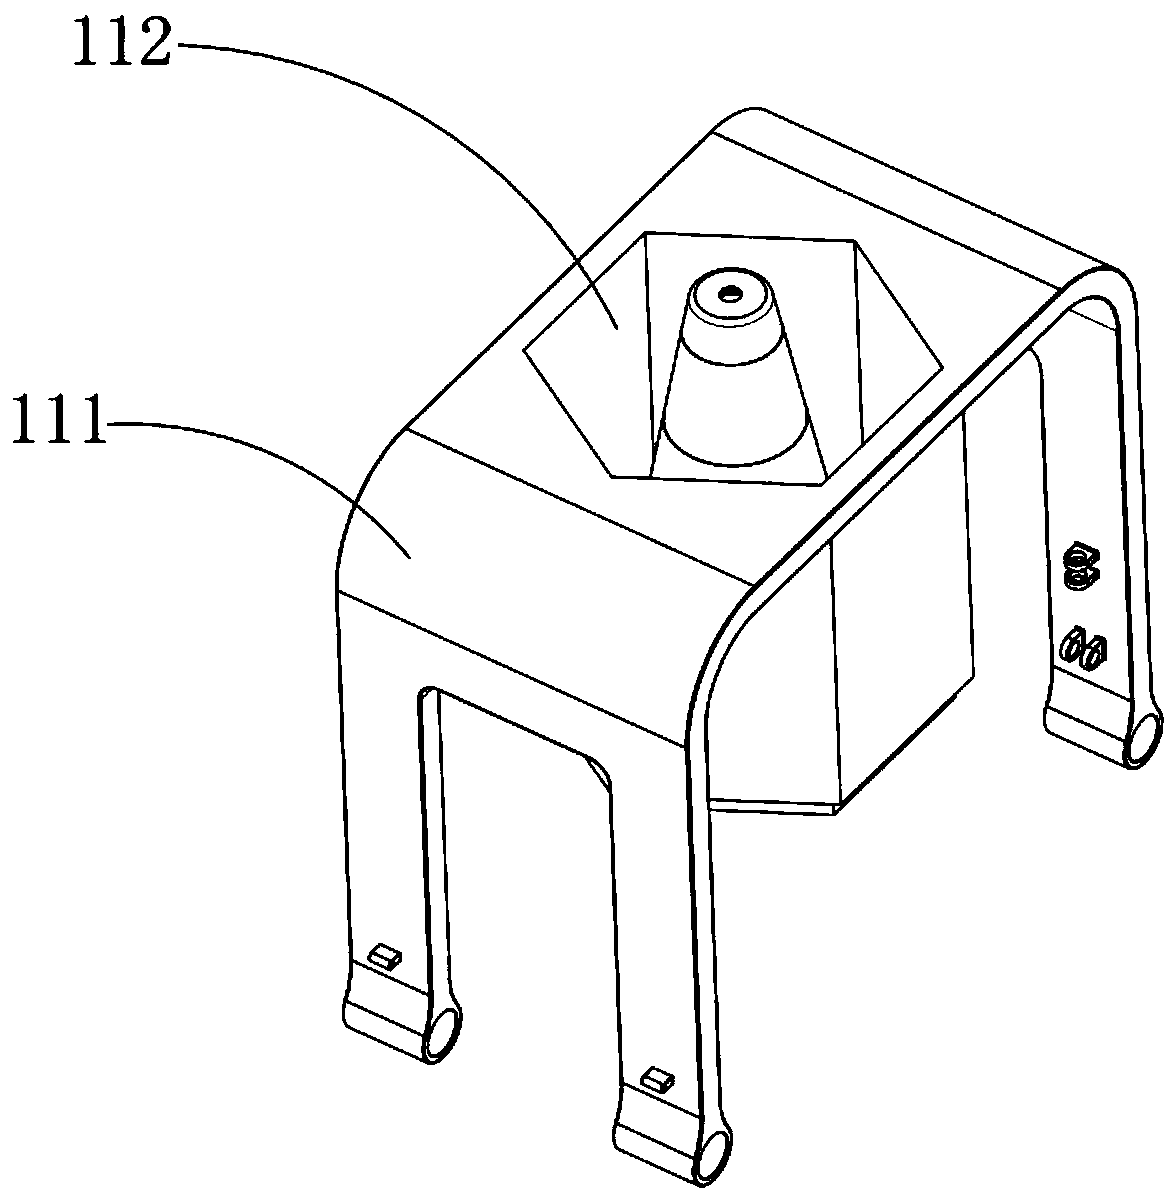 Construction cart for automatic traffic cone arrangement and placement